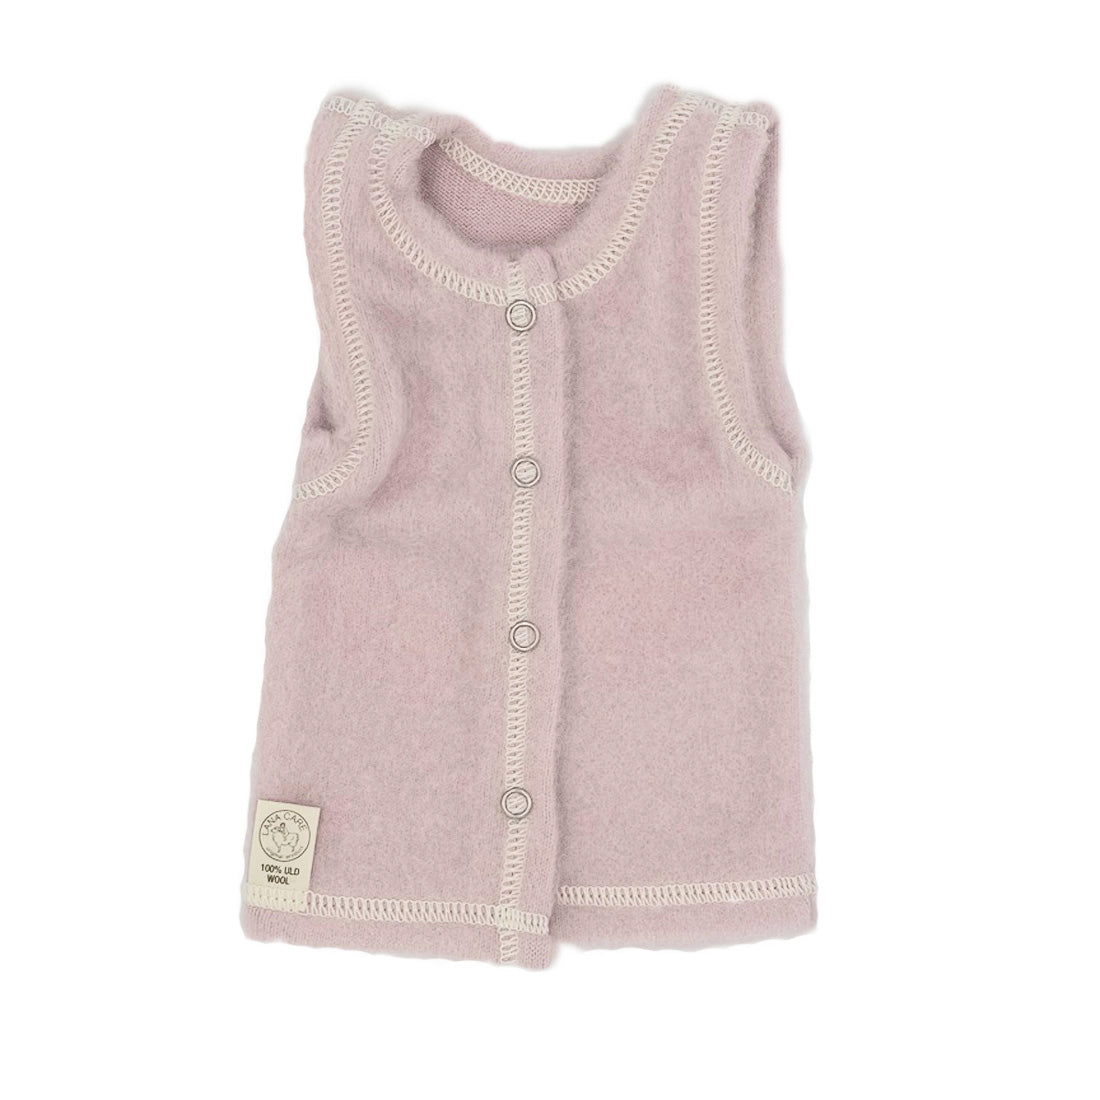 Wool & Silk Long-Sleeved Vest Top Organic Merino Wool & Silk Blend Vest   Buy online for your child [707810 or 727810] - £22.00 : Cambridge Baby,  Organic Natural Clothing